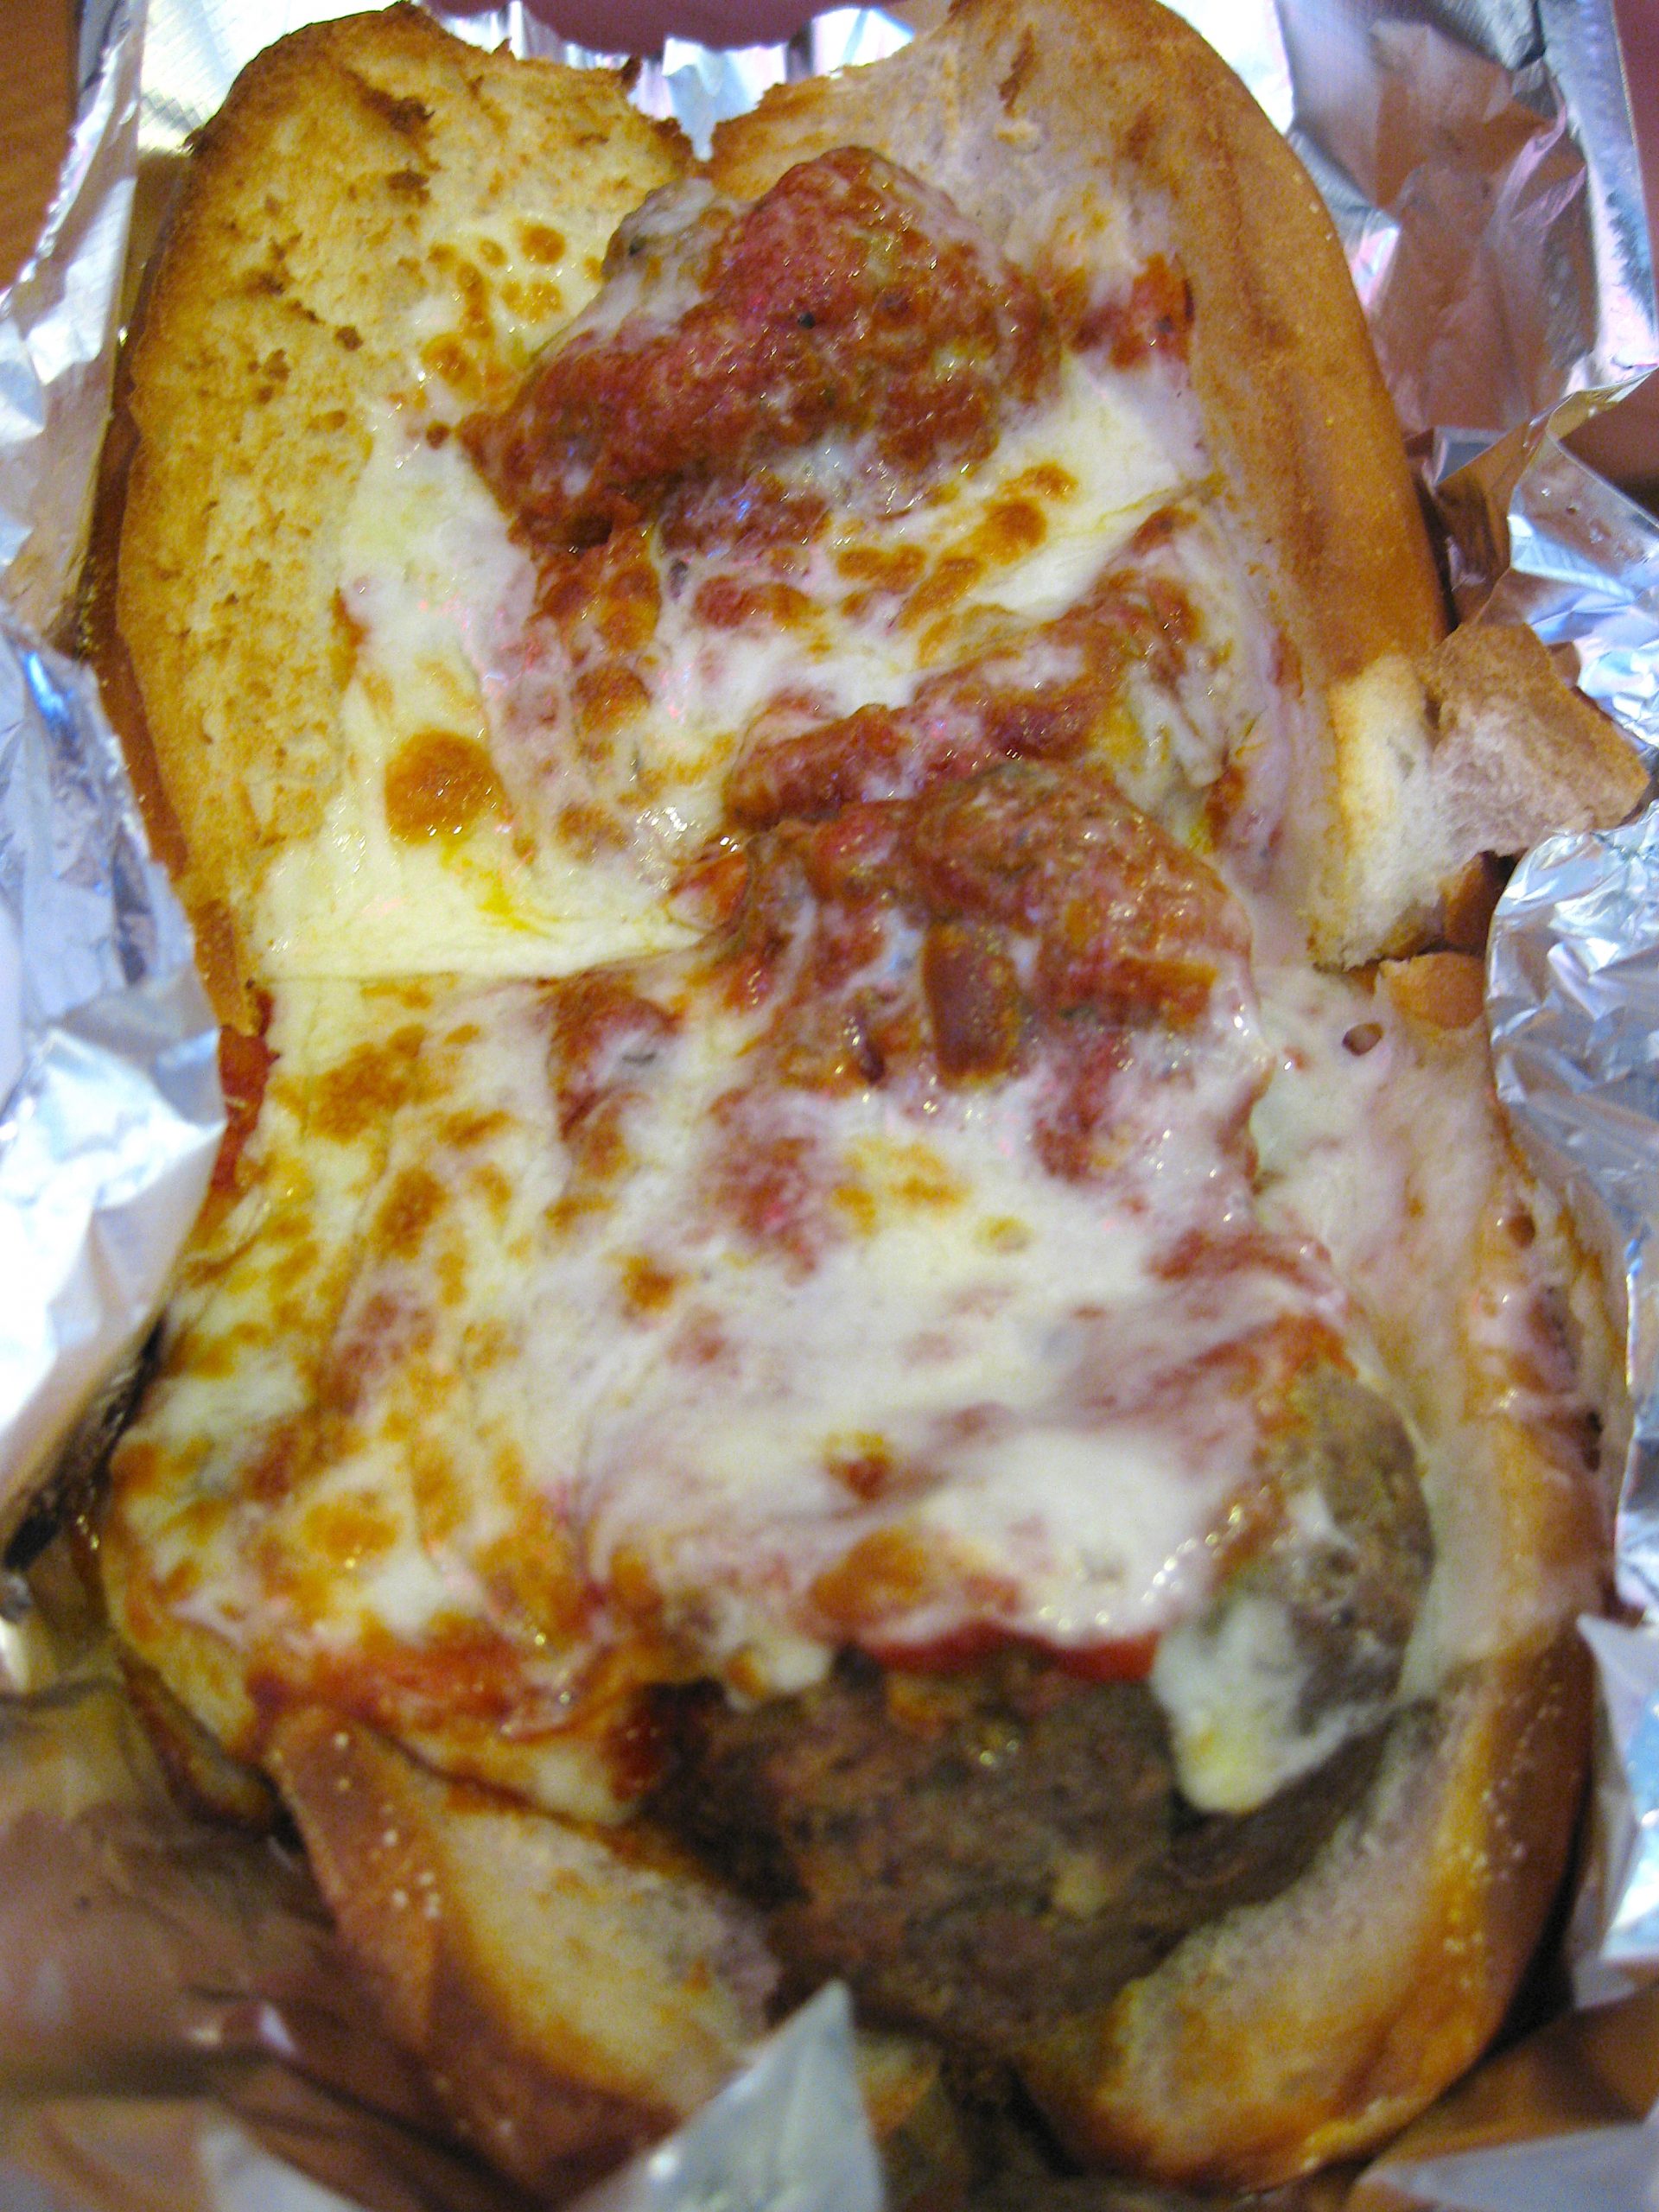 Meatball Sub from Steve's Pizza in North Miami, Florida